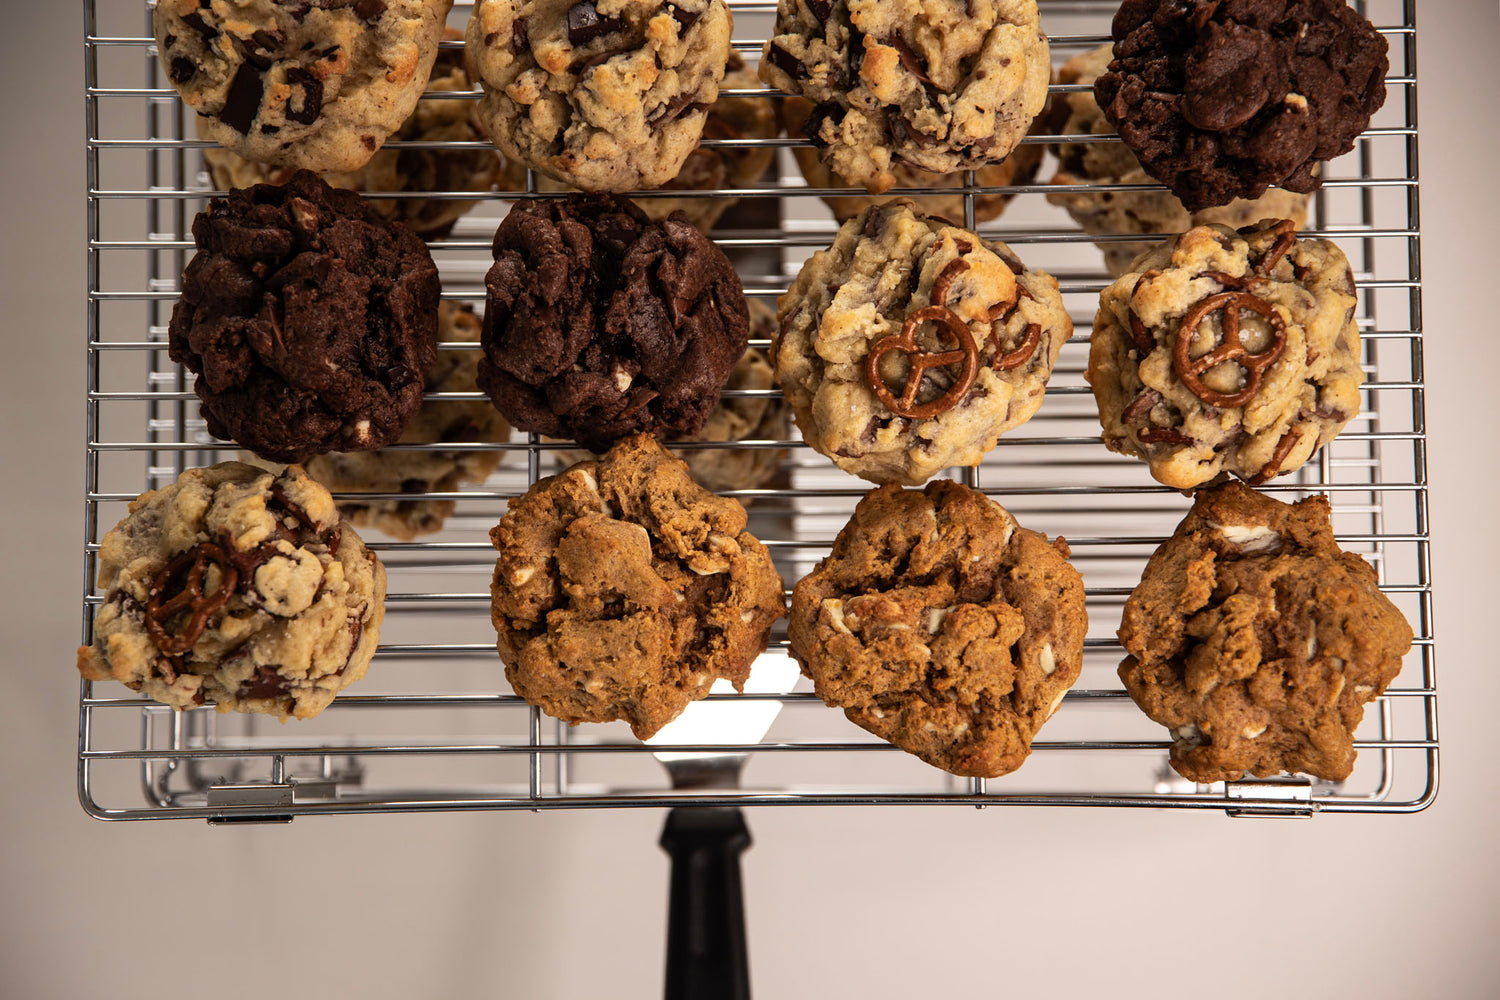 Different flavors of American style chunky cookies